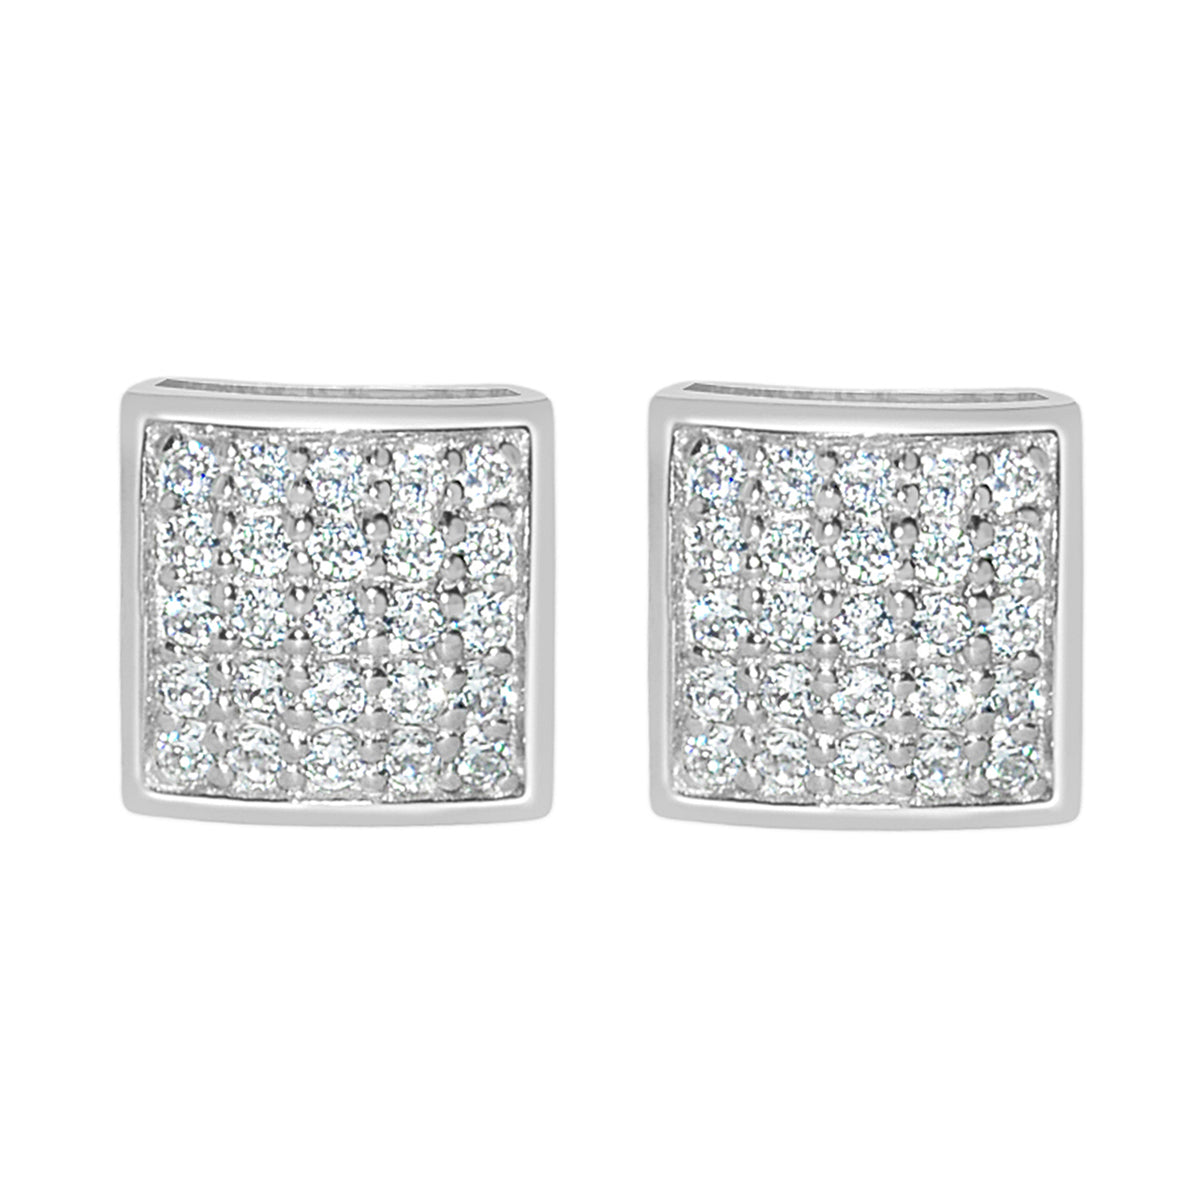 14k White Gold 7mm Composite Cubic Zirconia Square Stud Earrings